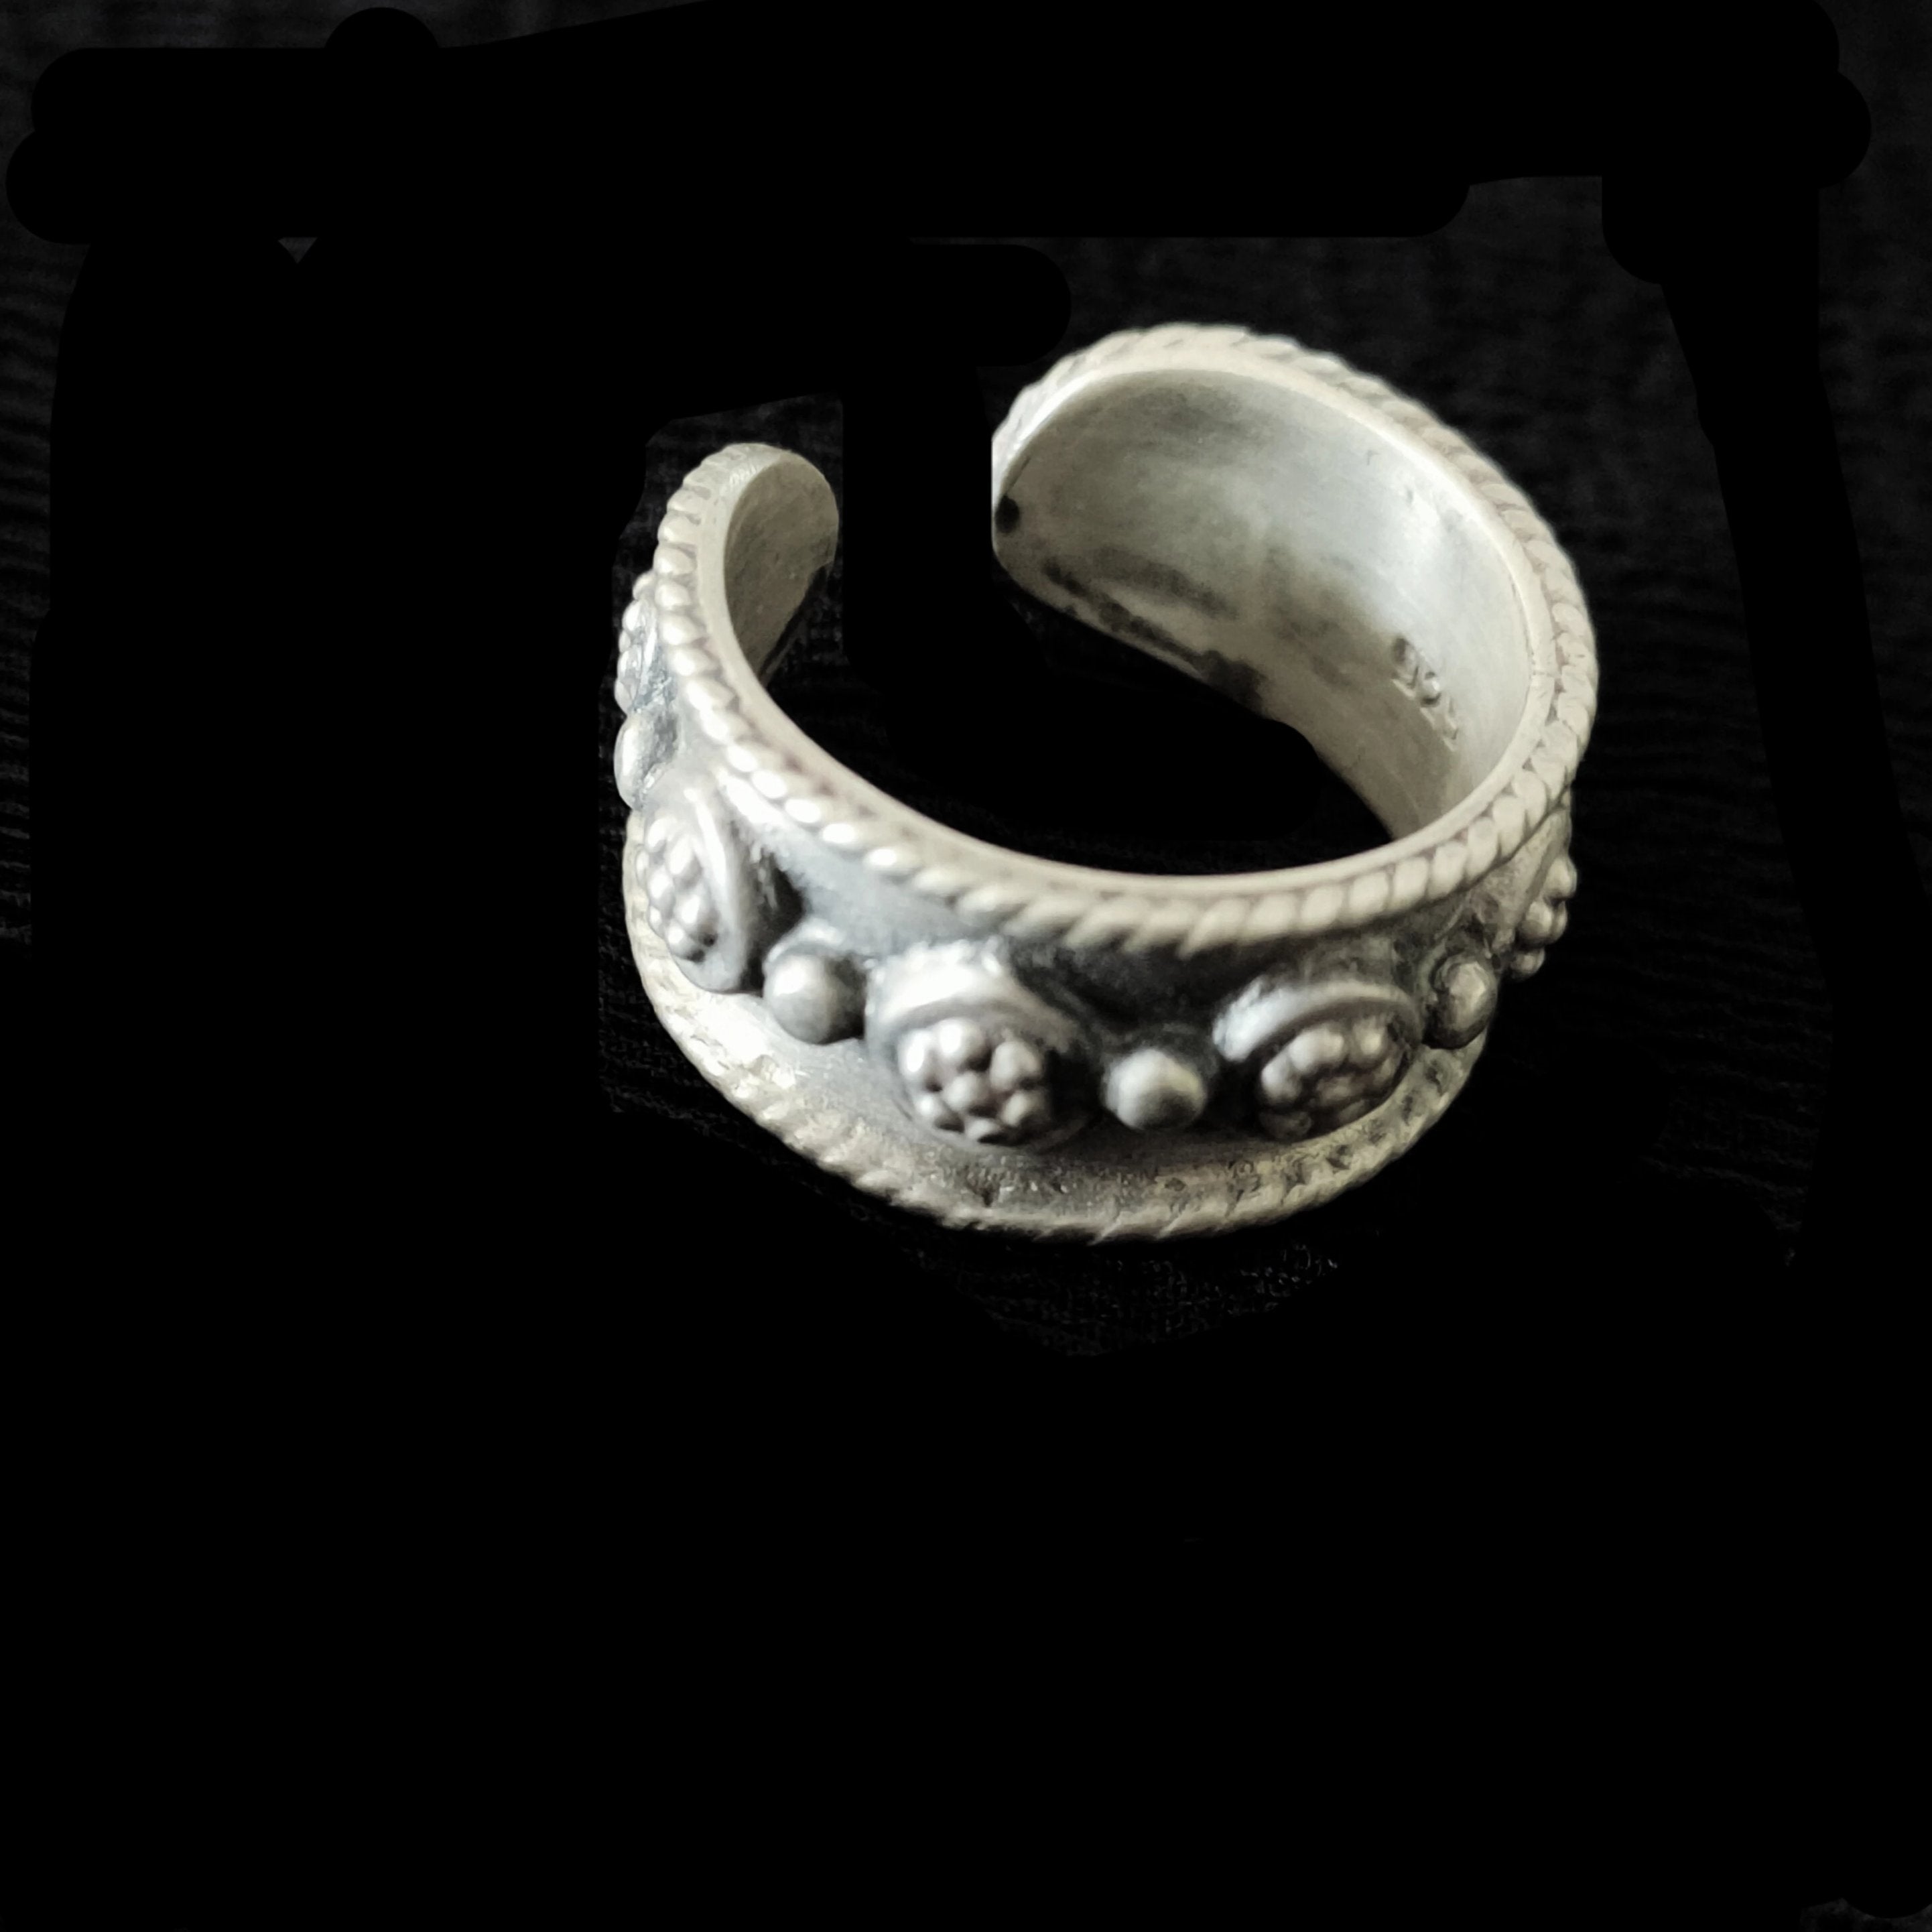 Buy best silver toe ring designs online from Quirksmith